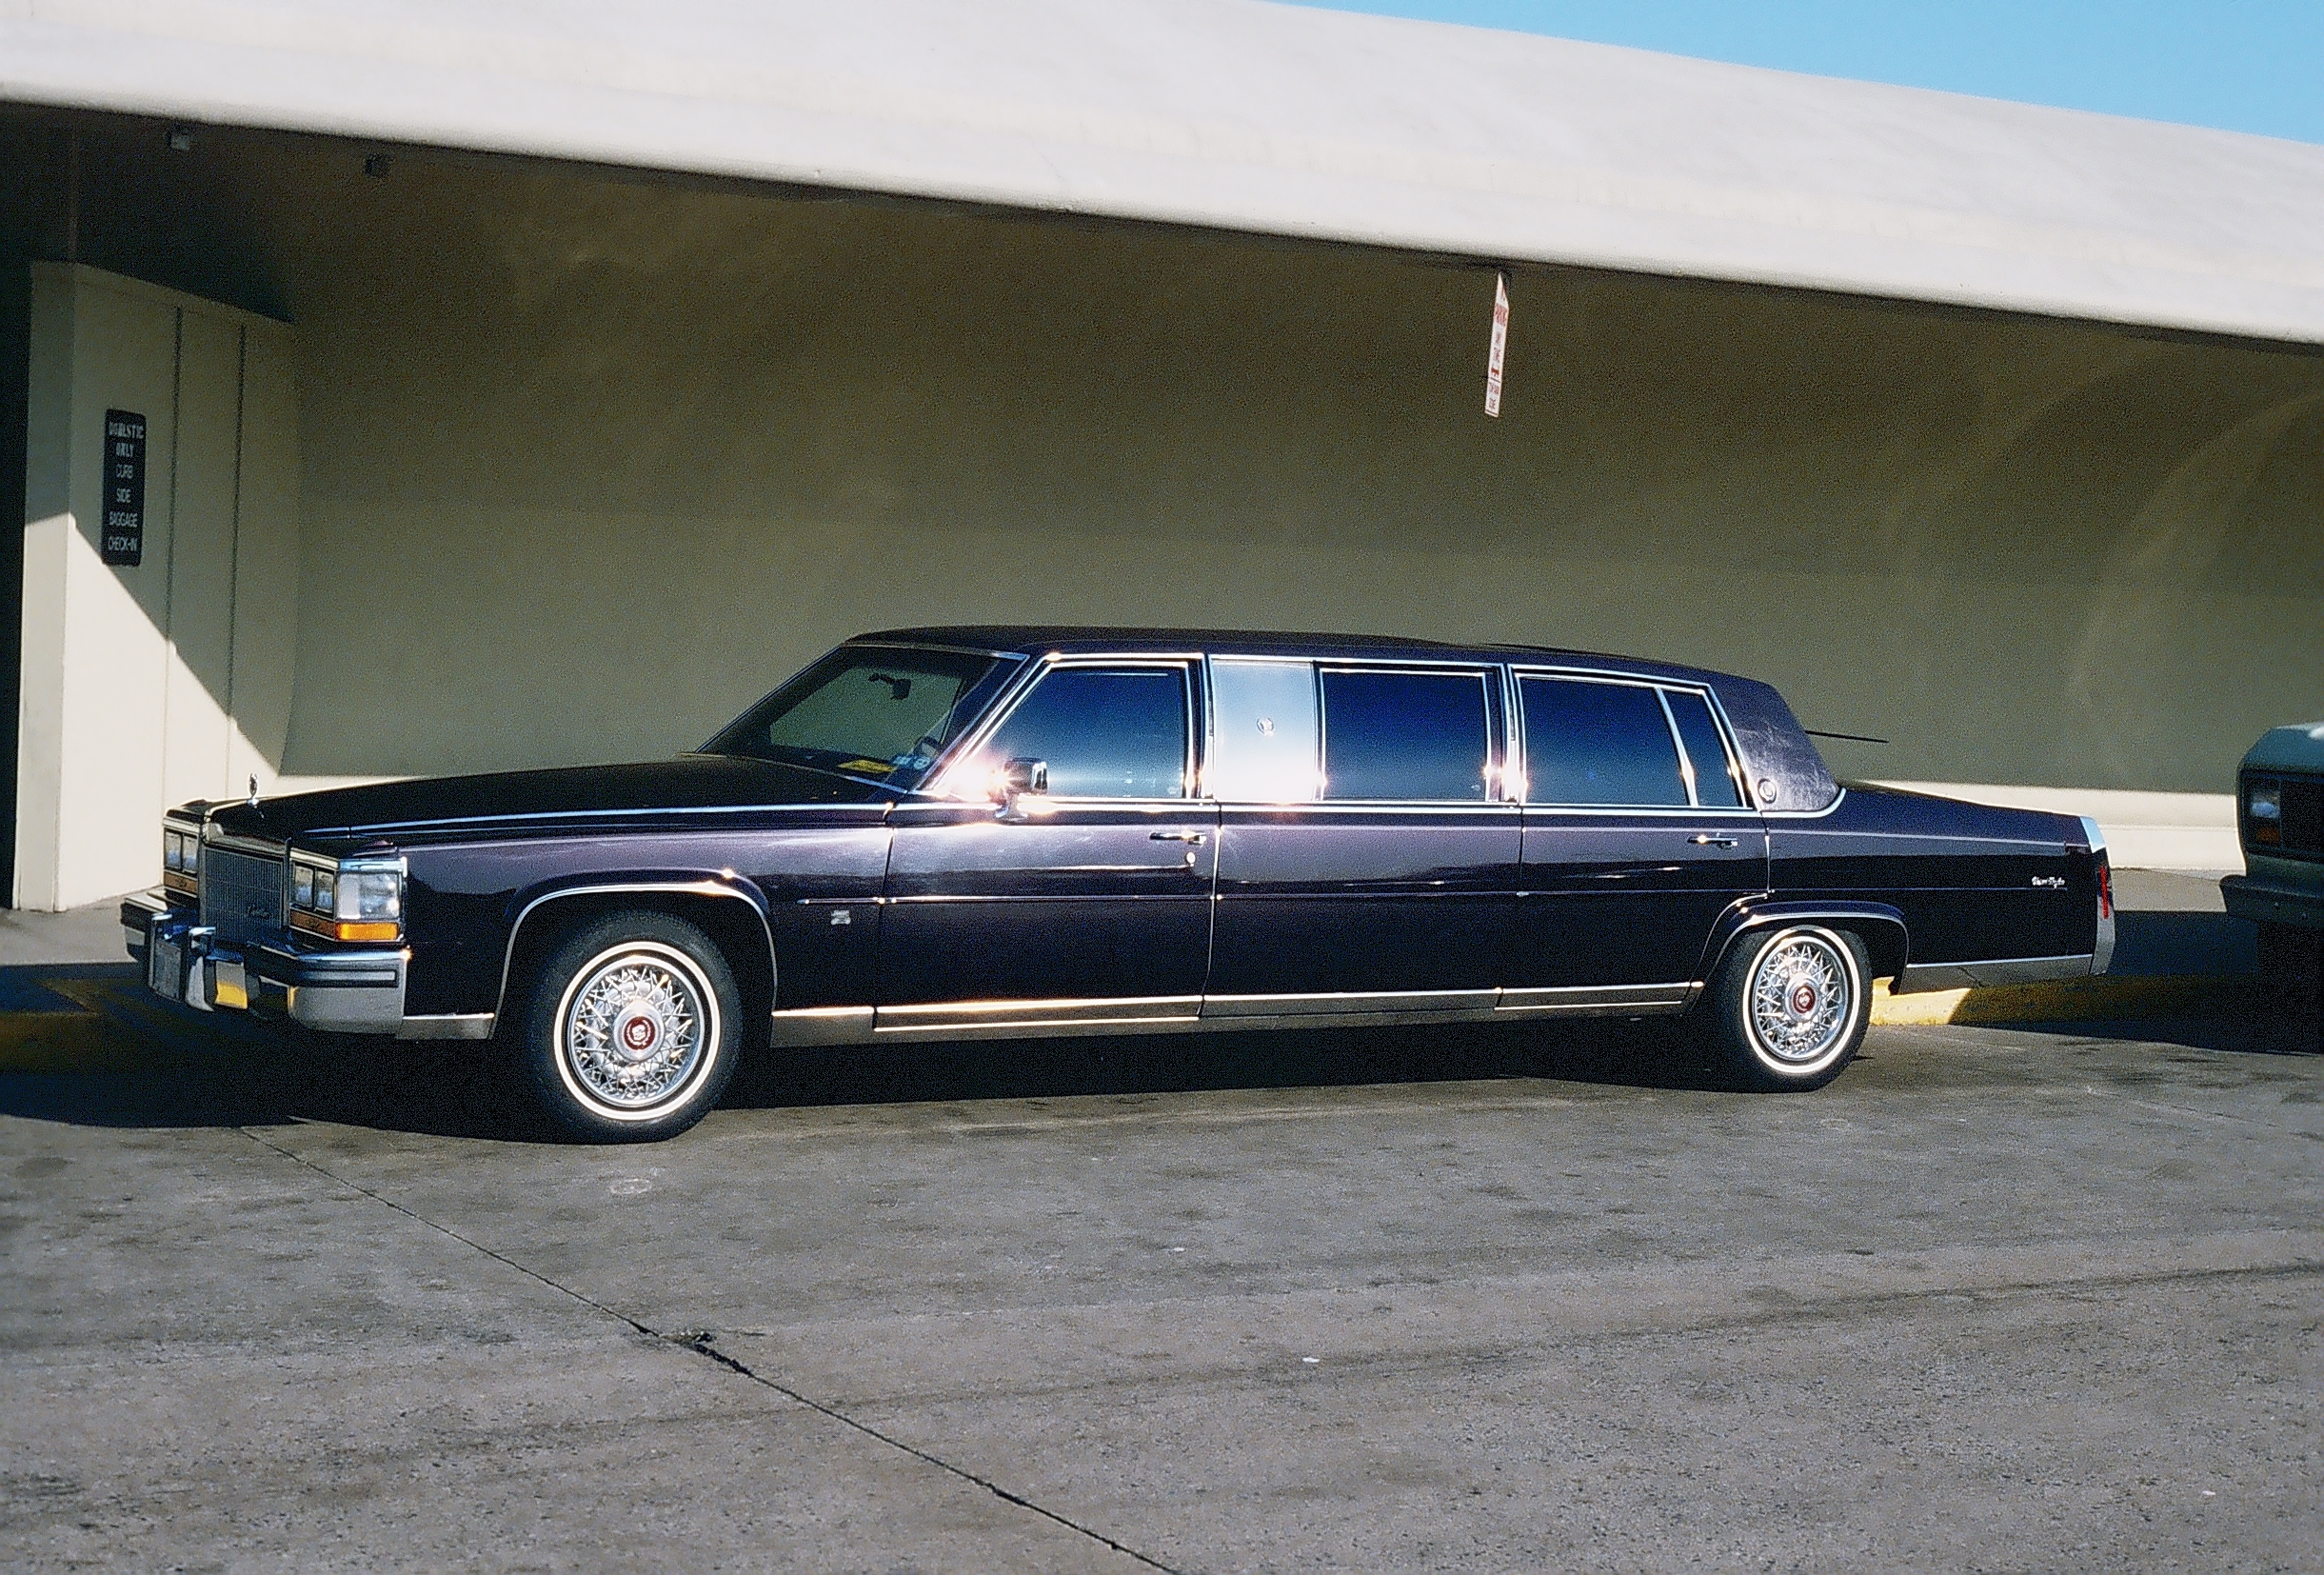 Limousine at JFK airport, NY